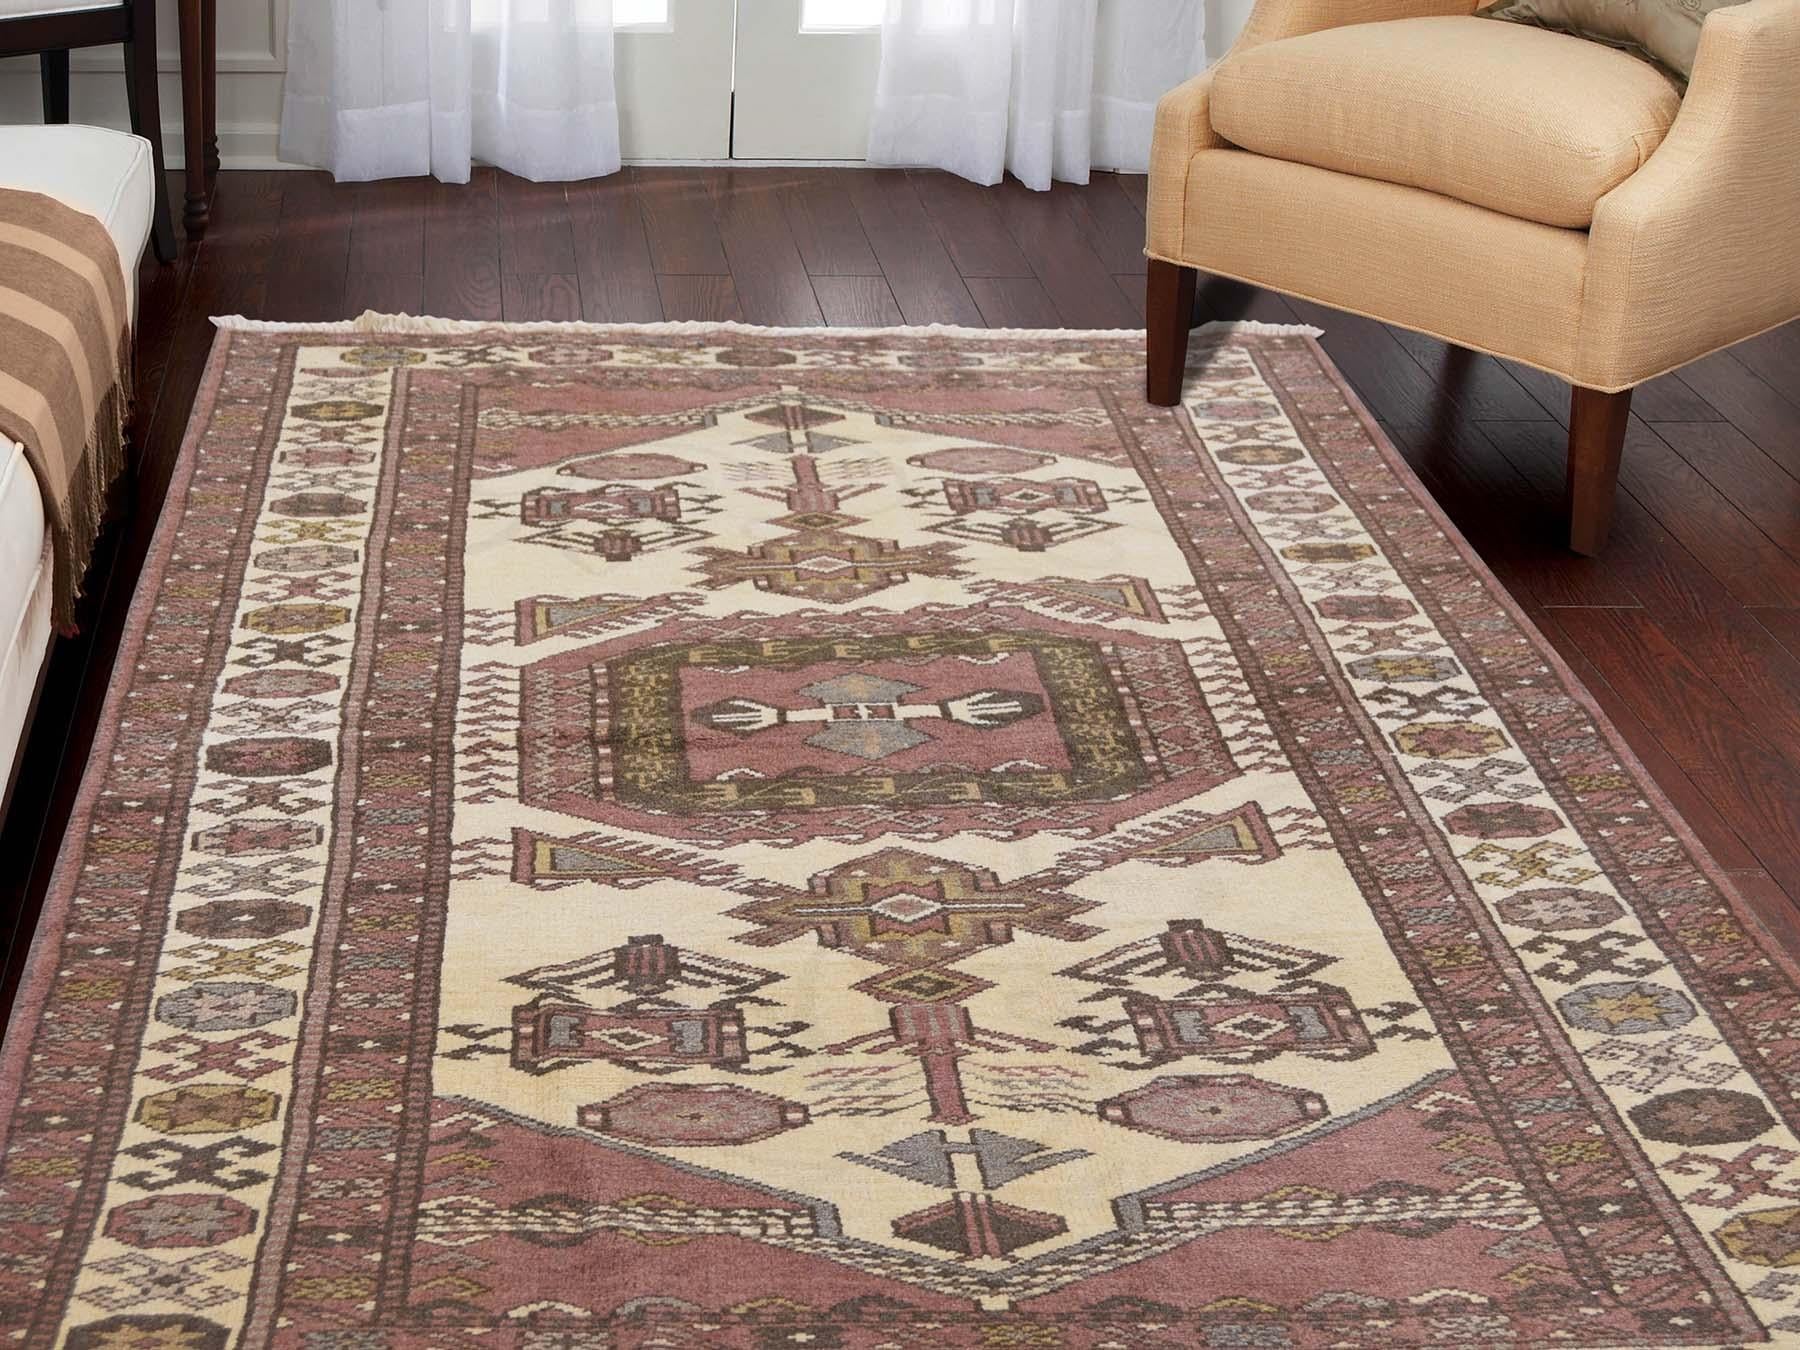 This fabulous hand knotted carpet has been created and designed for extra strength and durability. This rug has been handcrafted for weeks in the traditional method that is used to make rugs. This is truly a one of kind piece.

Exact rug size in